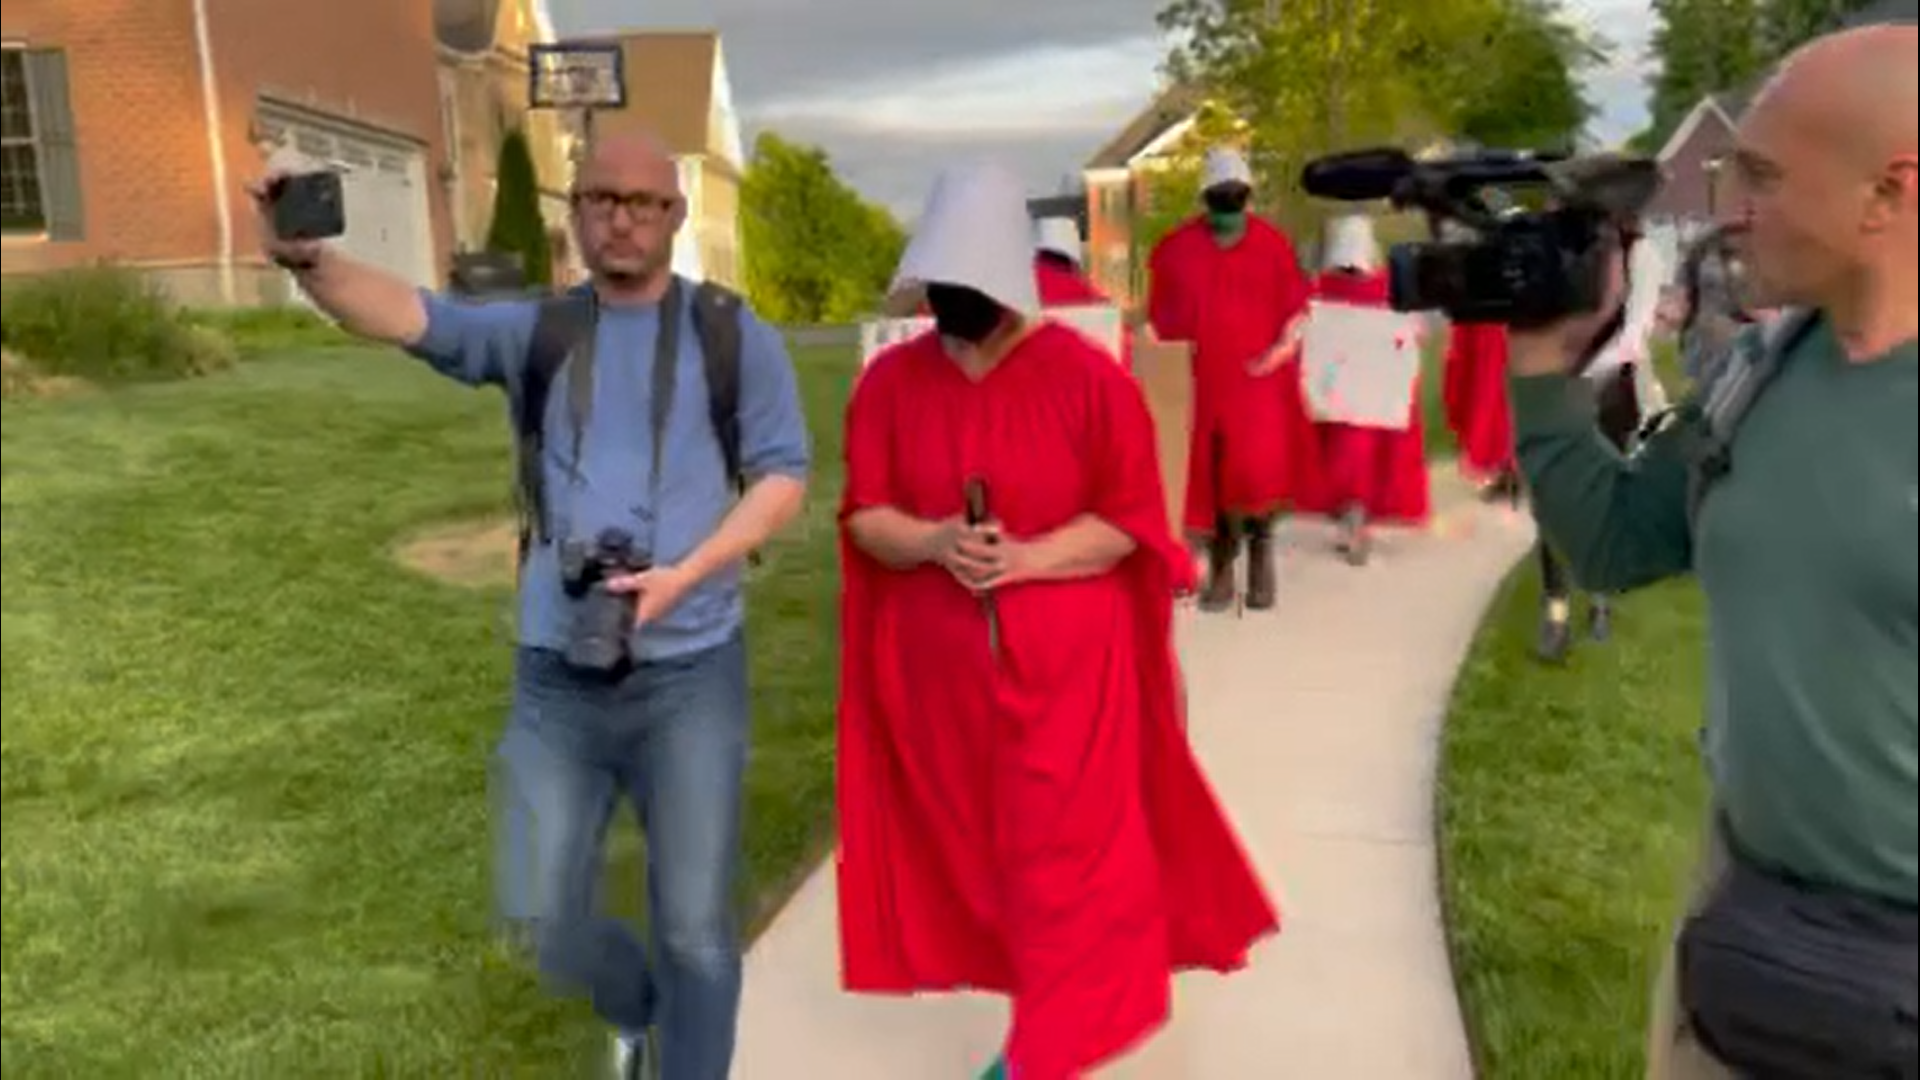 Handmaid-clad protester says Justice Barrett, mom of 5 biological kids, doesn’t know about full-term pregnancy